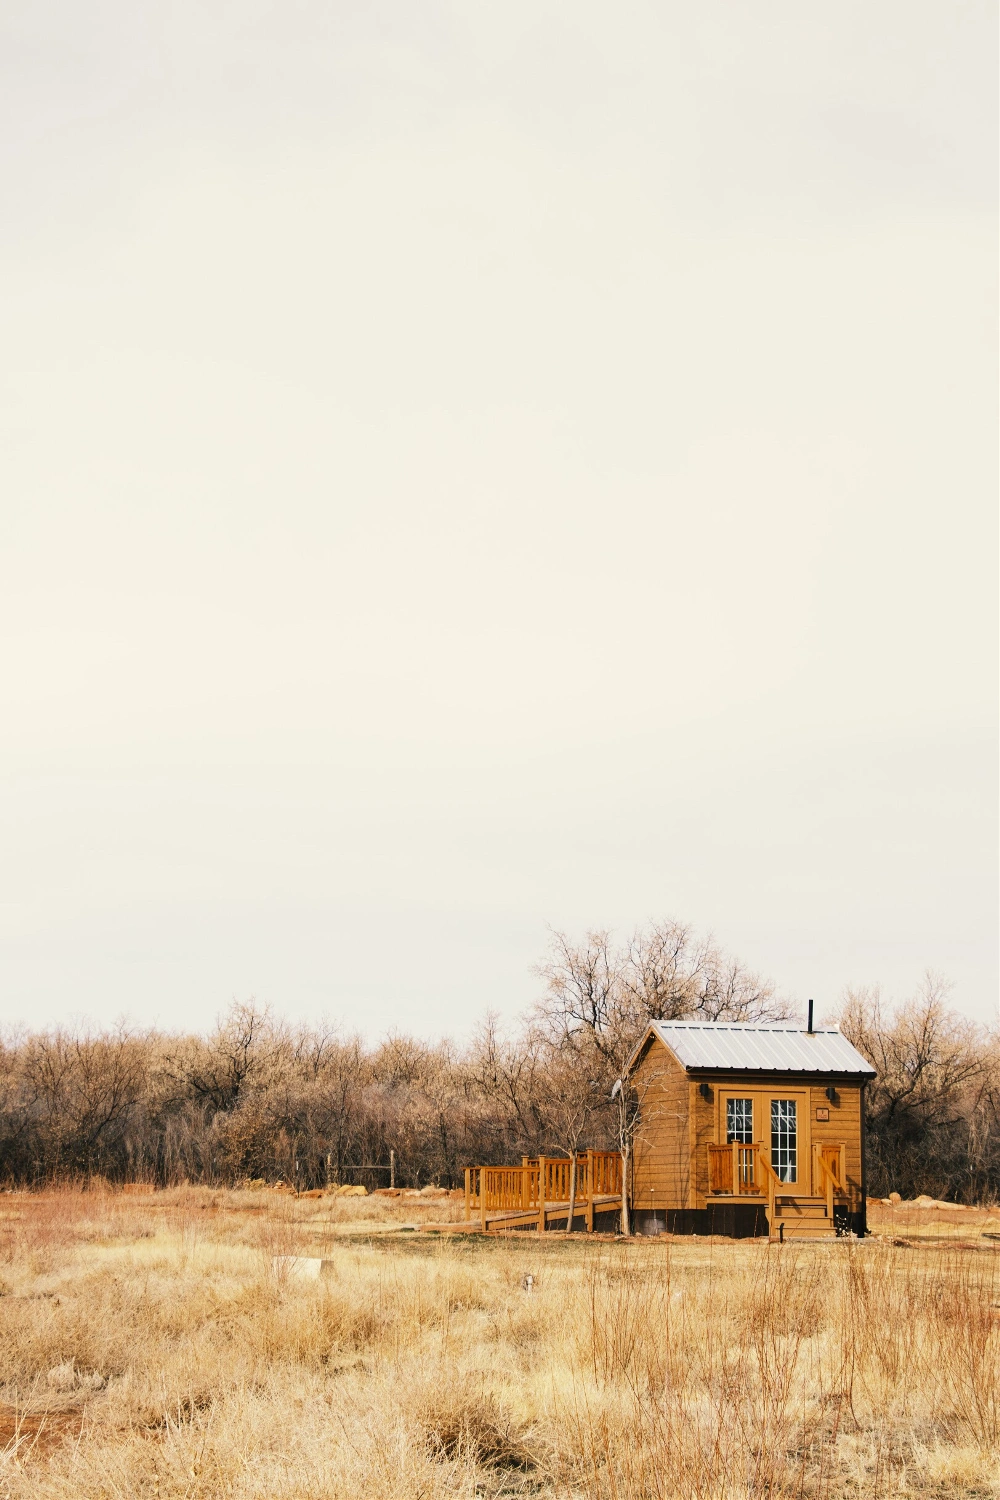 #cabin #wilderness #house #nature